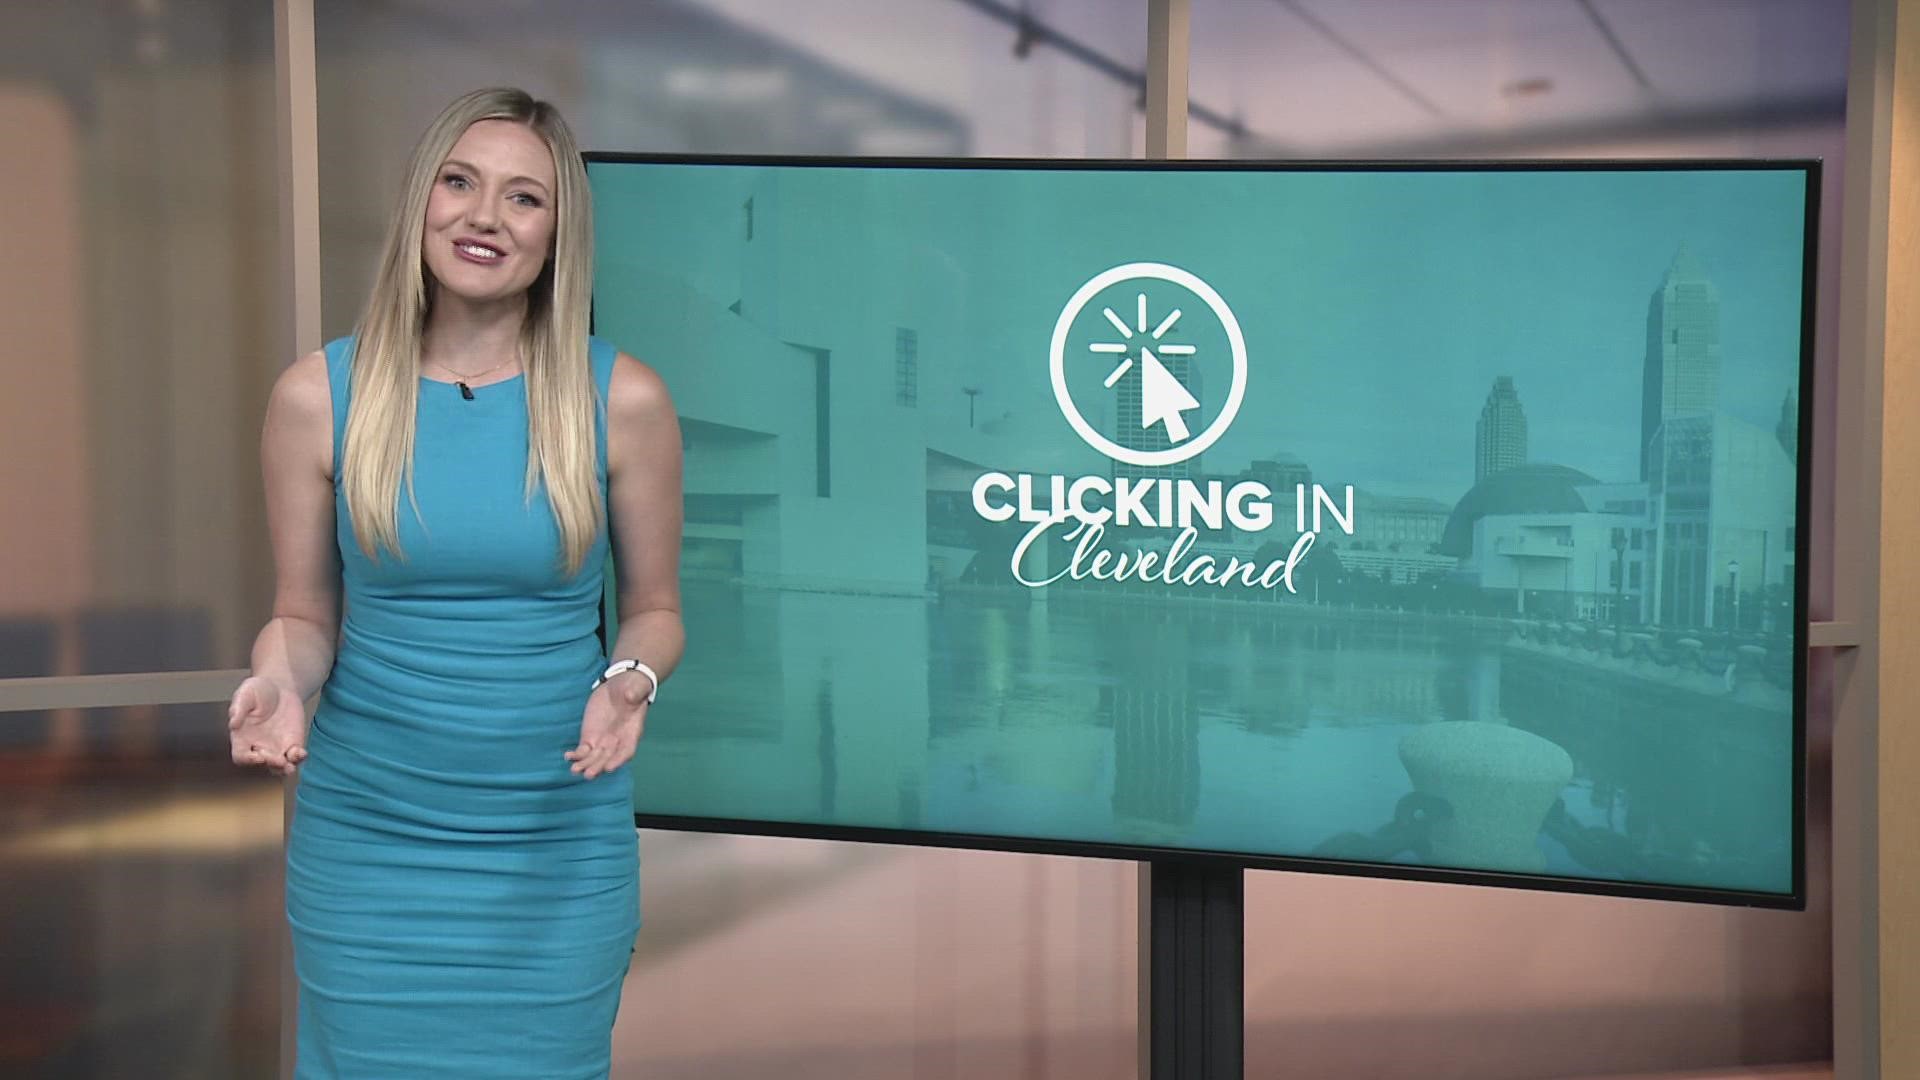 3News Digital Anchor Stephanie Haney takes you through the stories wkyc.com readers are clicking on, including the latest on the Deshaun Watson case.